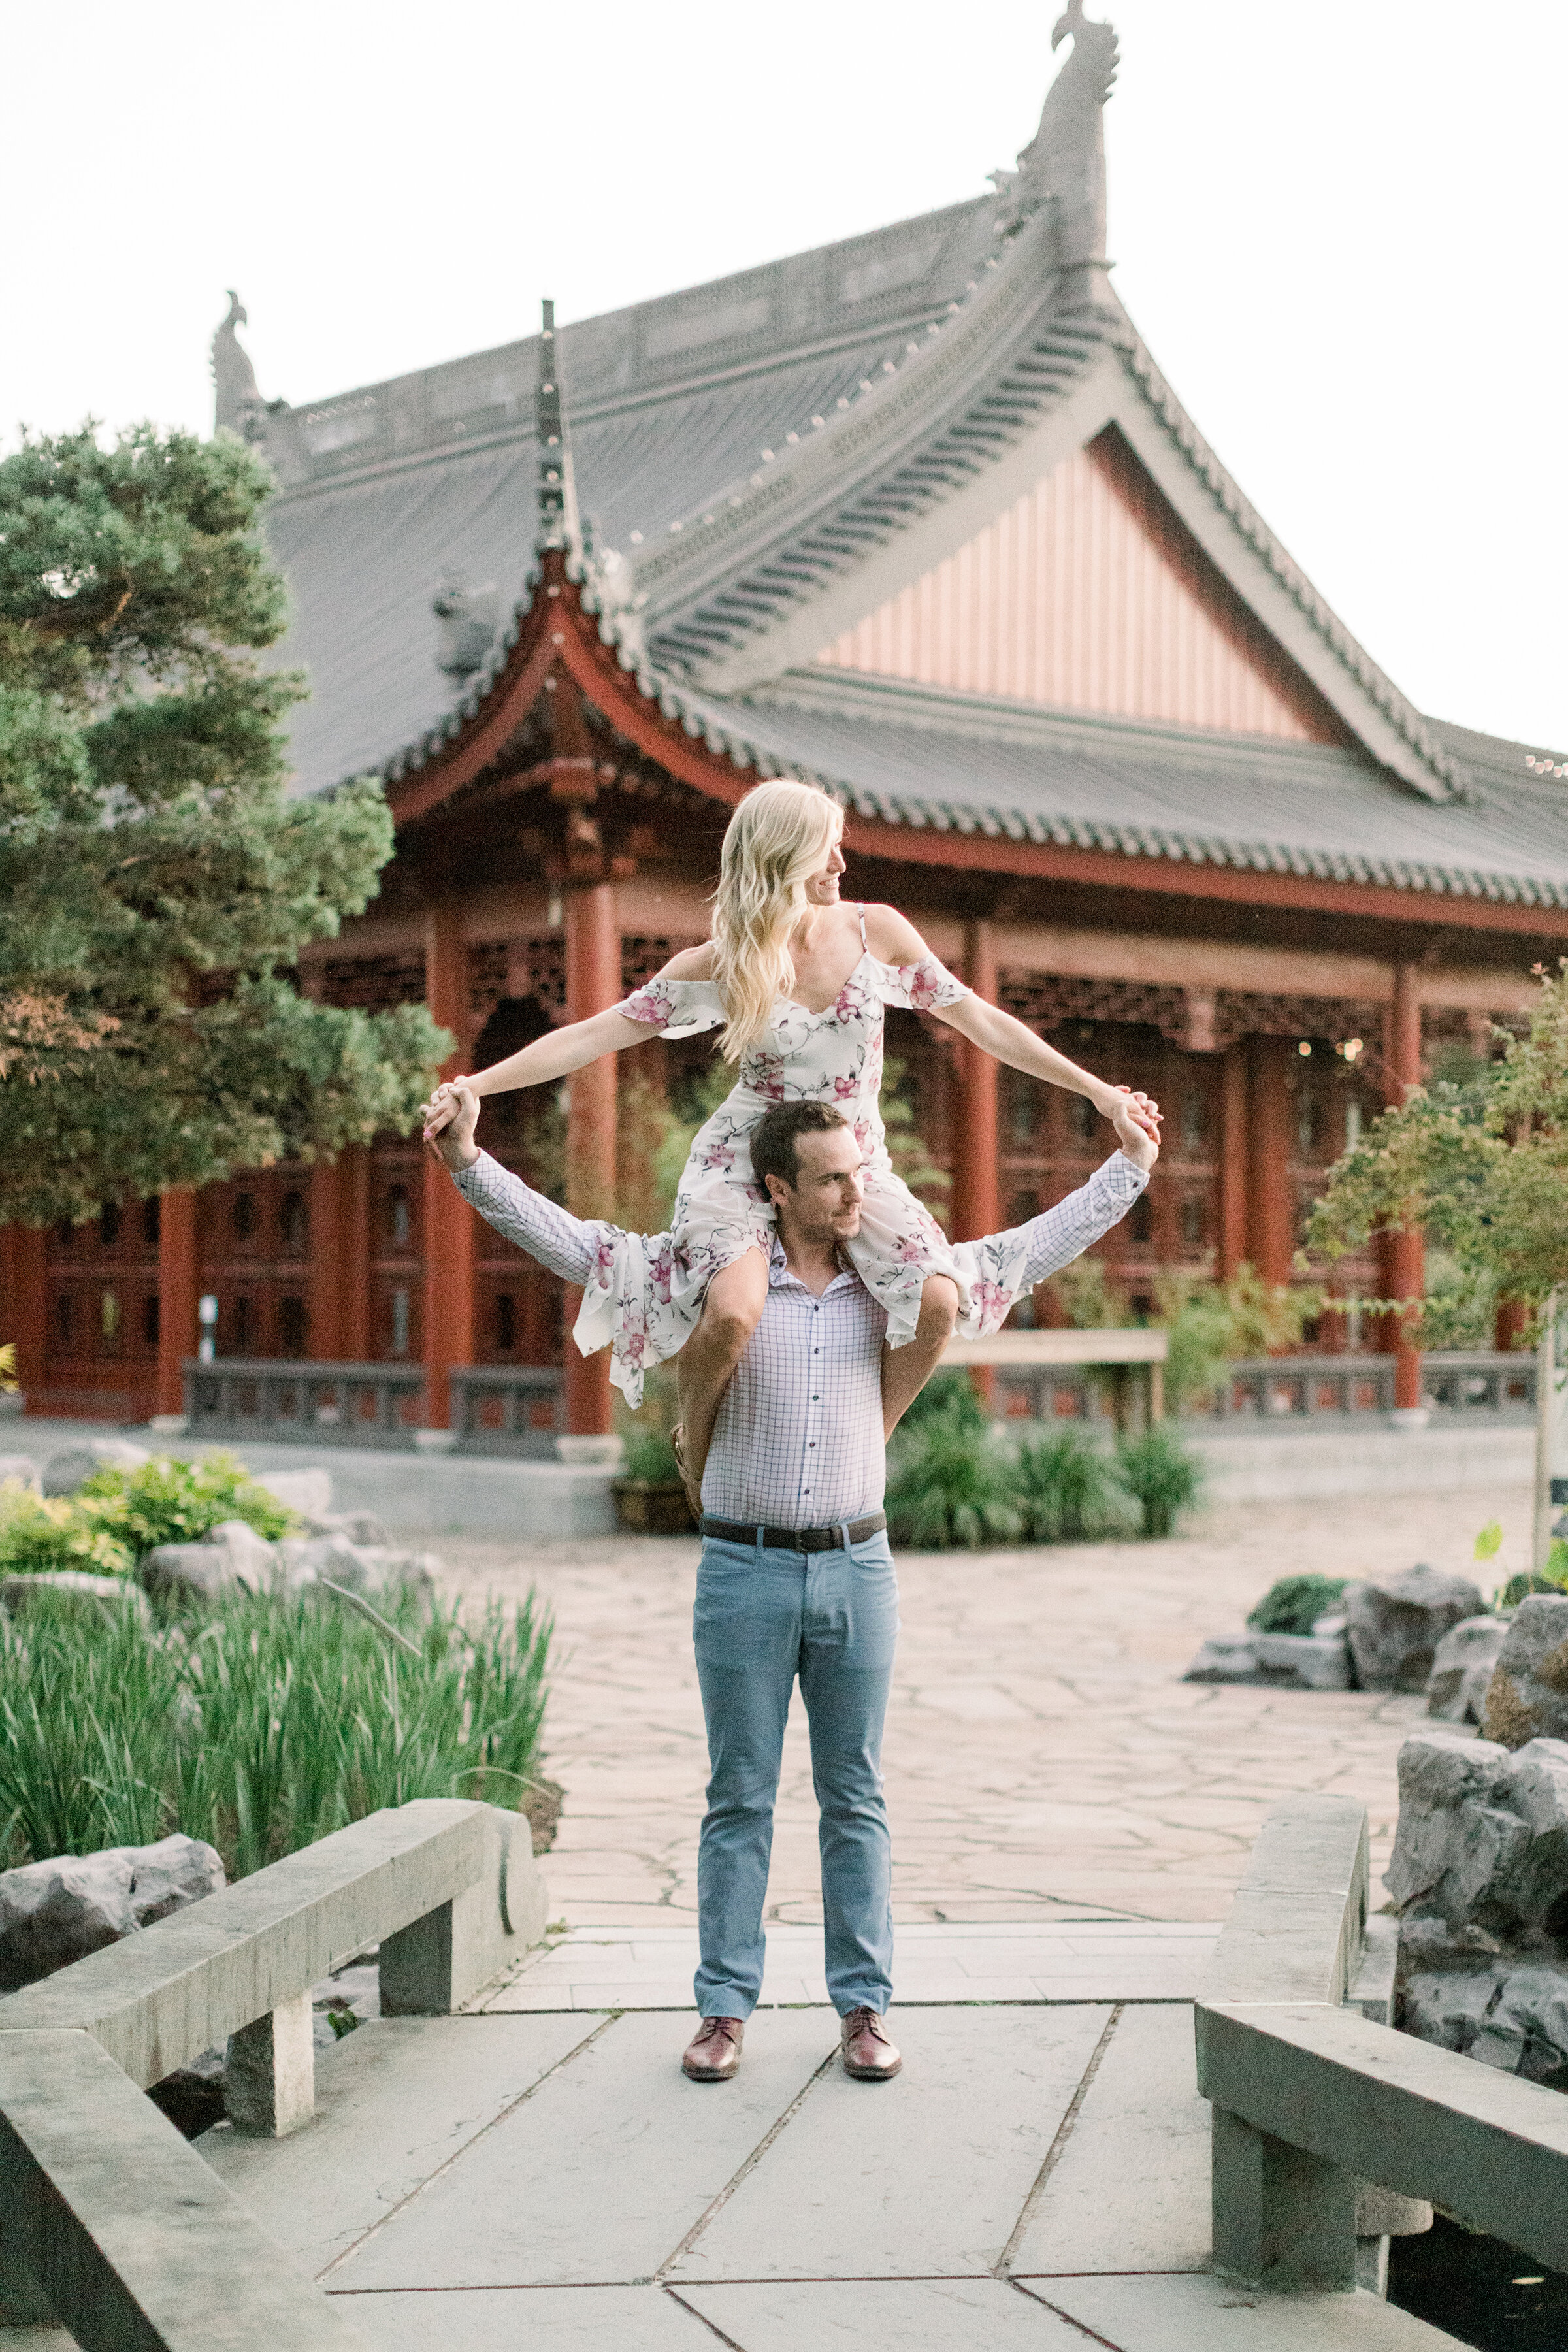  A women sits on her fiancés shoulders in a fun filled engagement session at the Botanical Gardens in Montreal, Canada. Professional engagement photographer Chelsea Mason Photography unique couple pose inspiration ideas and goals couple goals semi fo